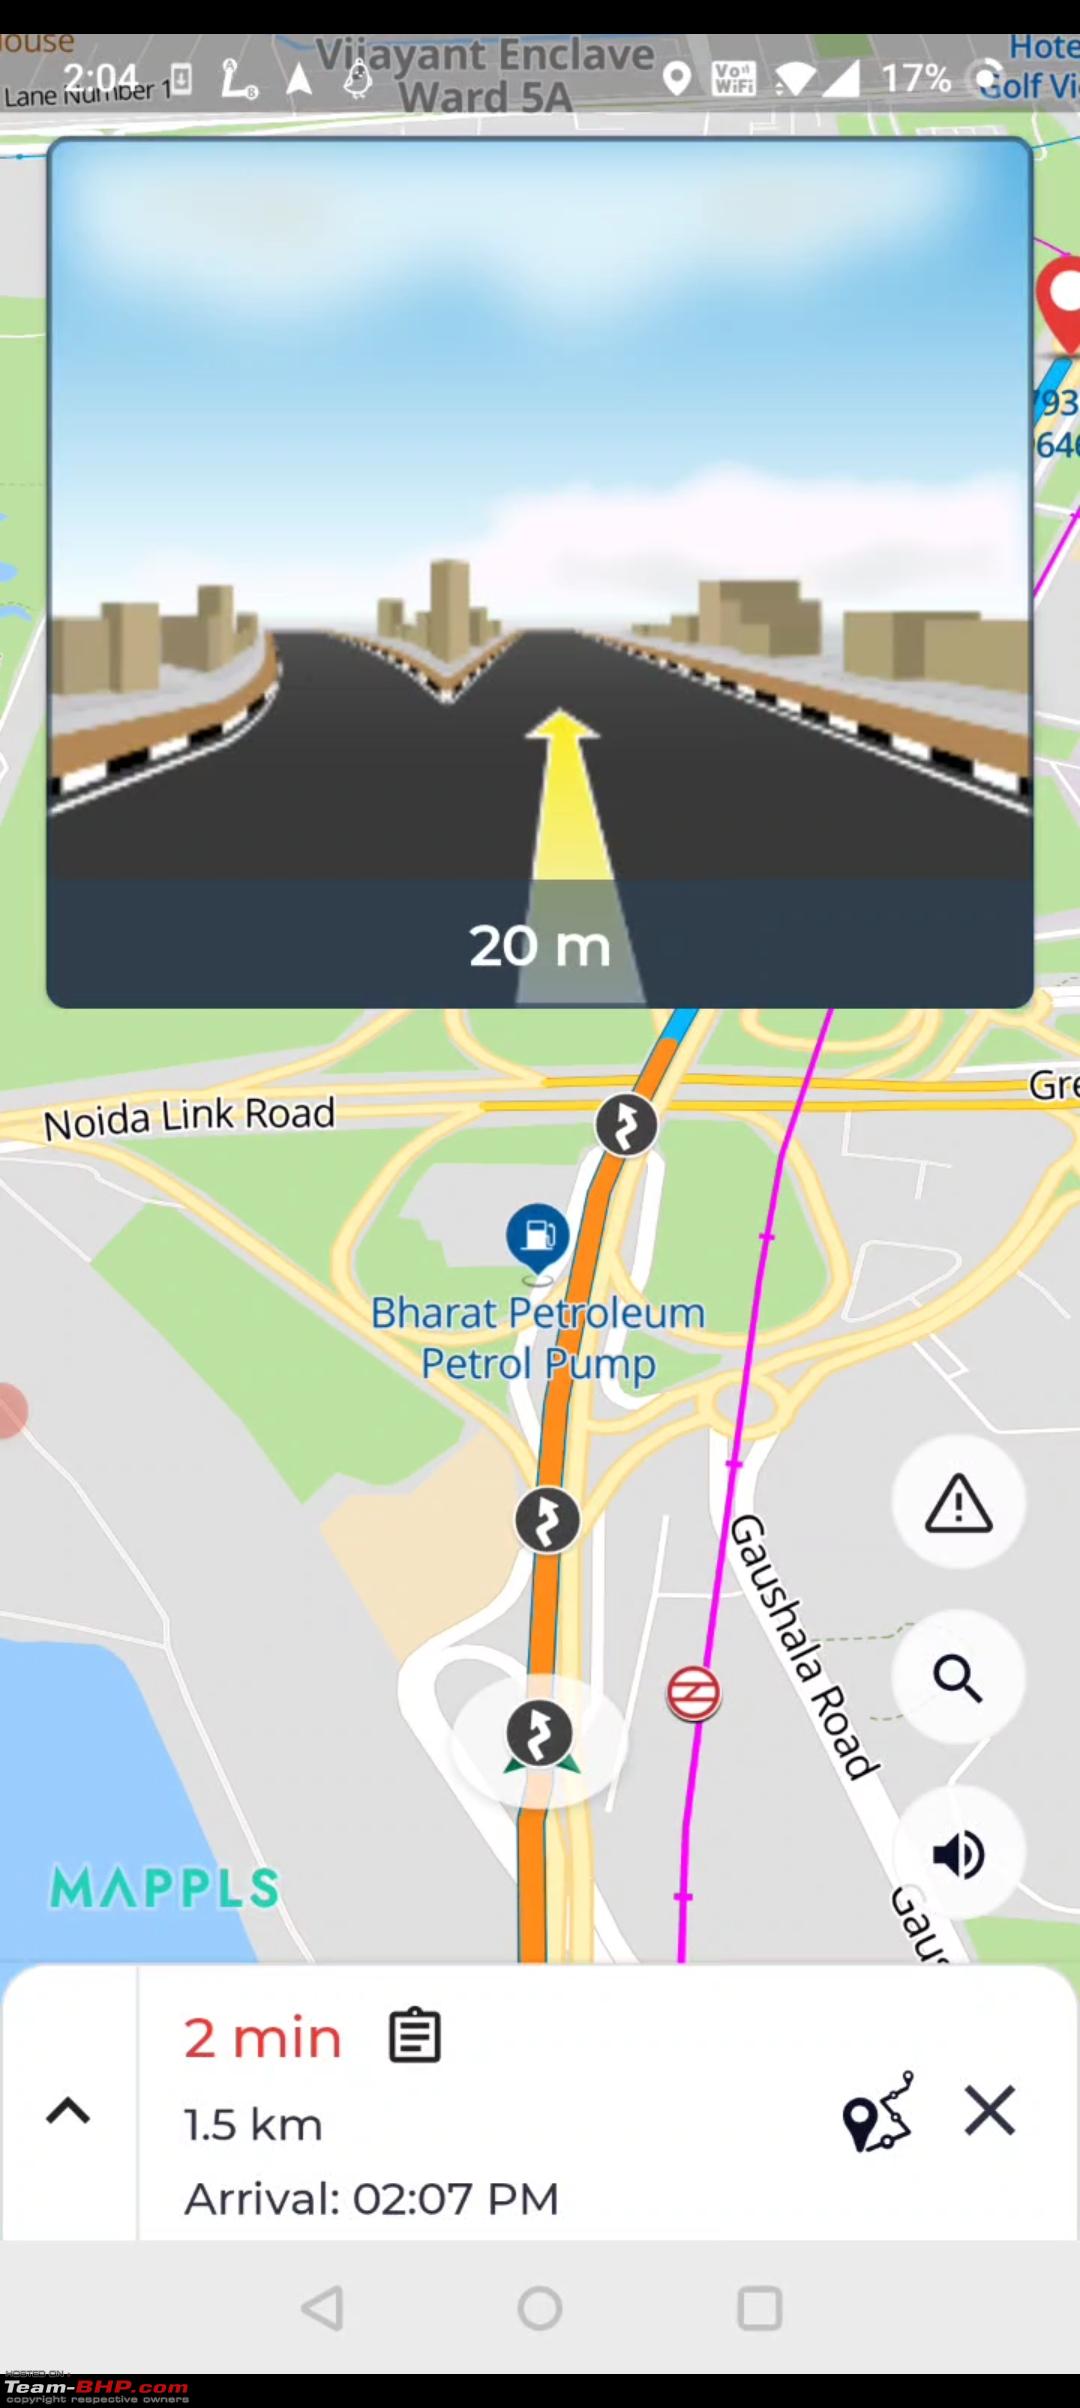 2393465d1671800105 Mapmyindia Adds Junction Views Feature Its Mappls App Screenshot Mappls App Junction View Noida 